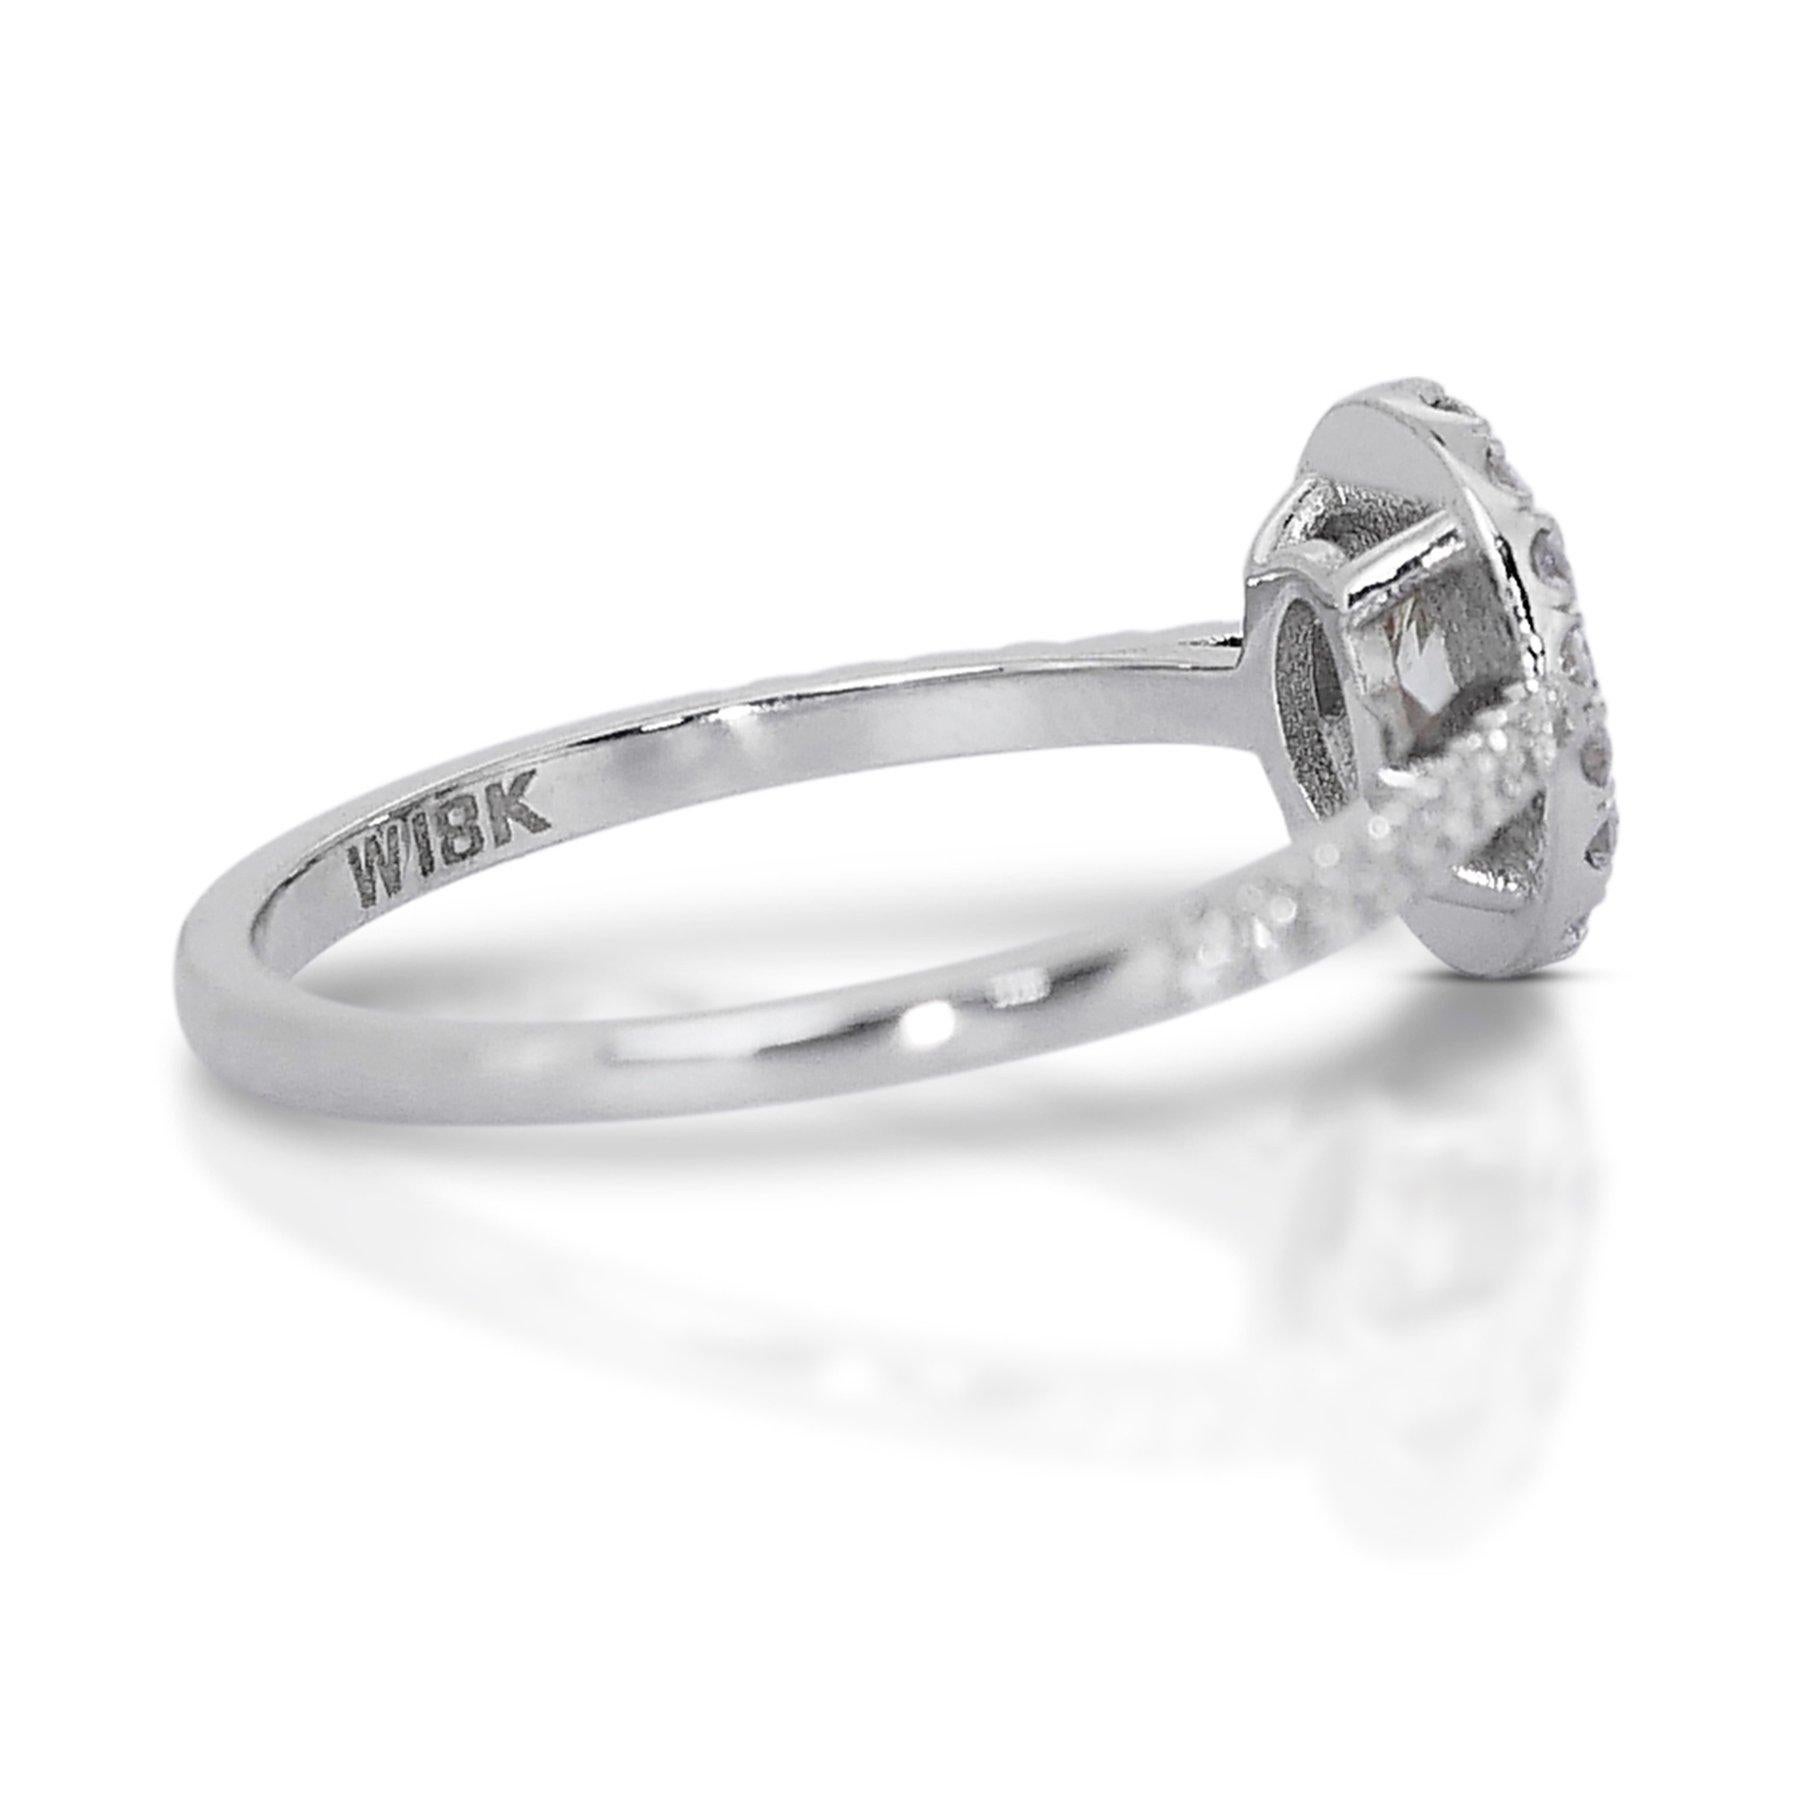 Captivating 1.01 ct Oval Diamond Halo Ring in 18k White Gold – GIA Certified In New Condition For Sale In רמת גן, IL